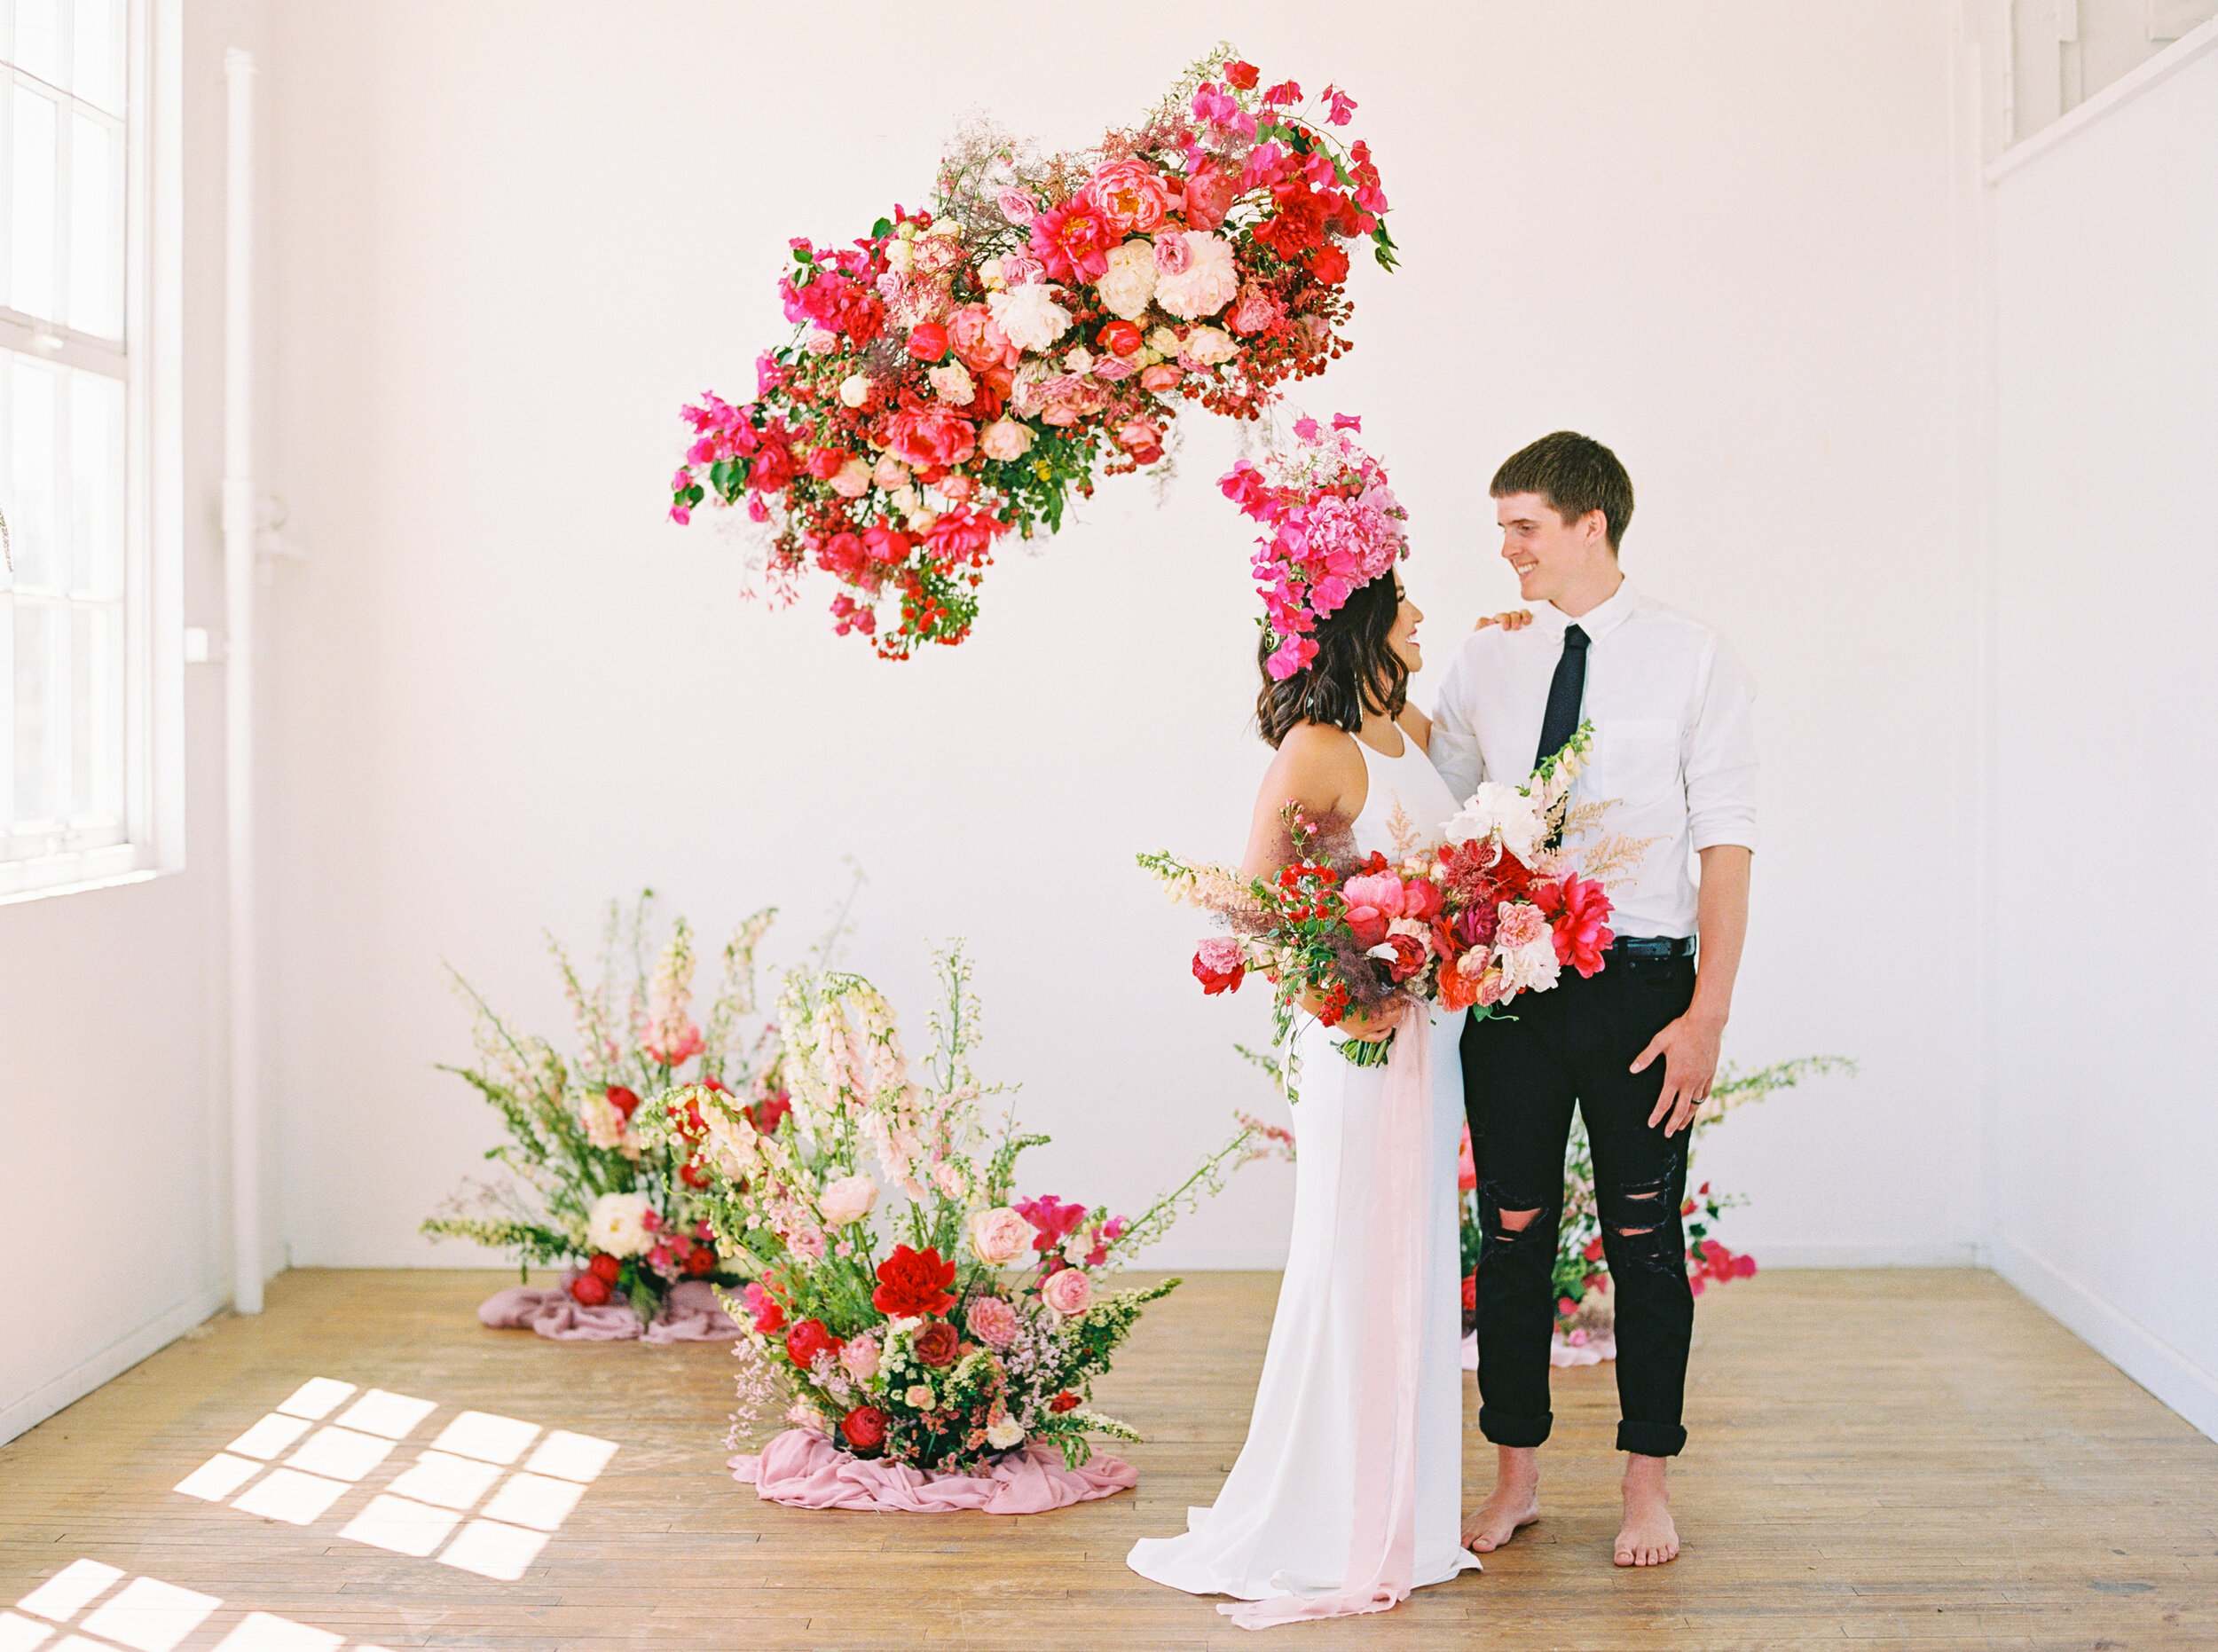 A Romantic Wedding Elopement Filled with Colorful Fuchsia - Sarahi Hadden Submission-66.jpg